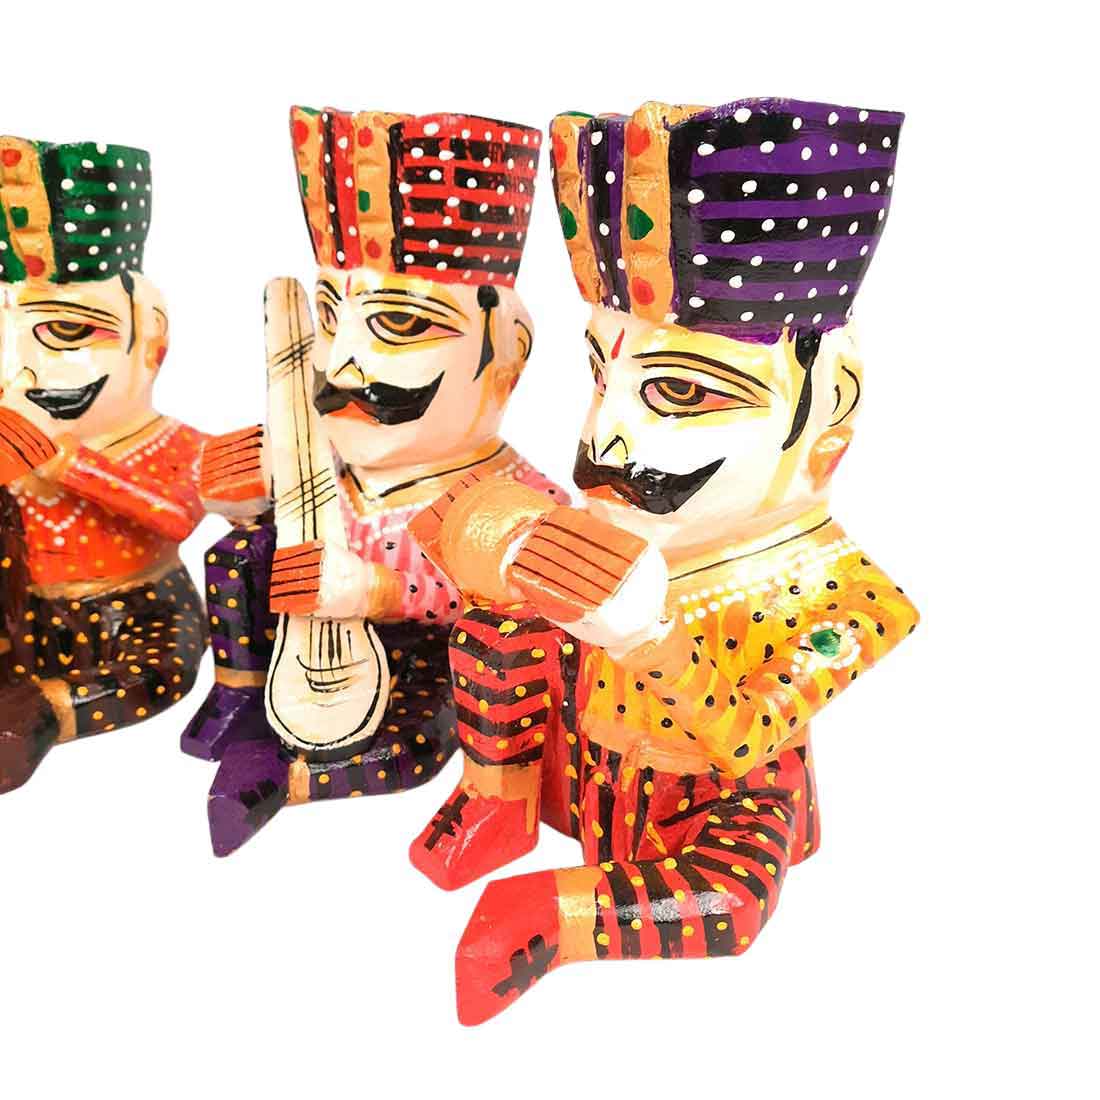 Rajasthani Musician Showpiece - For Table & Home Decor - 9 Inch -Set of 5